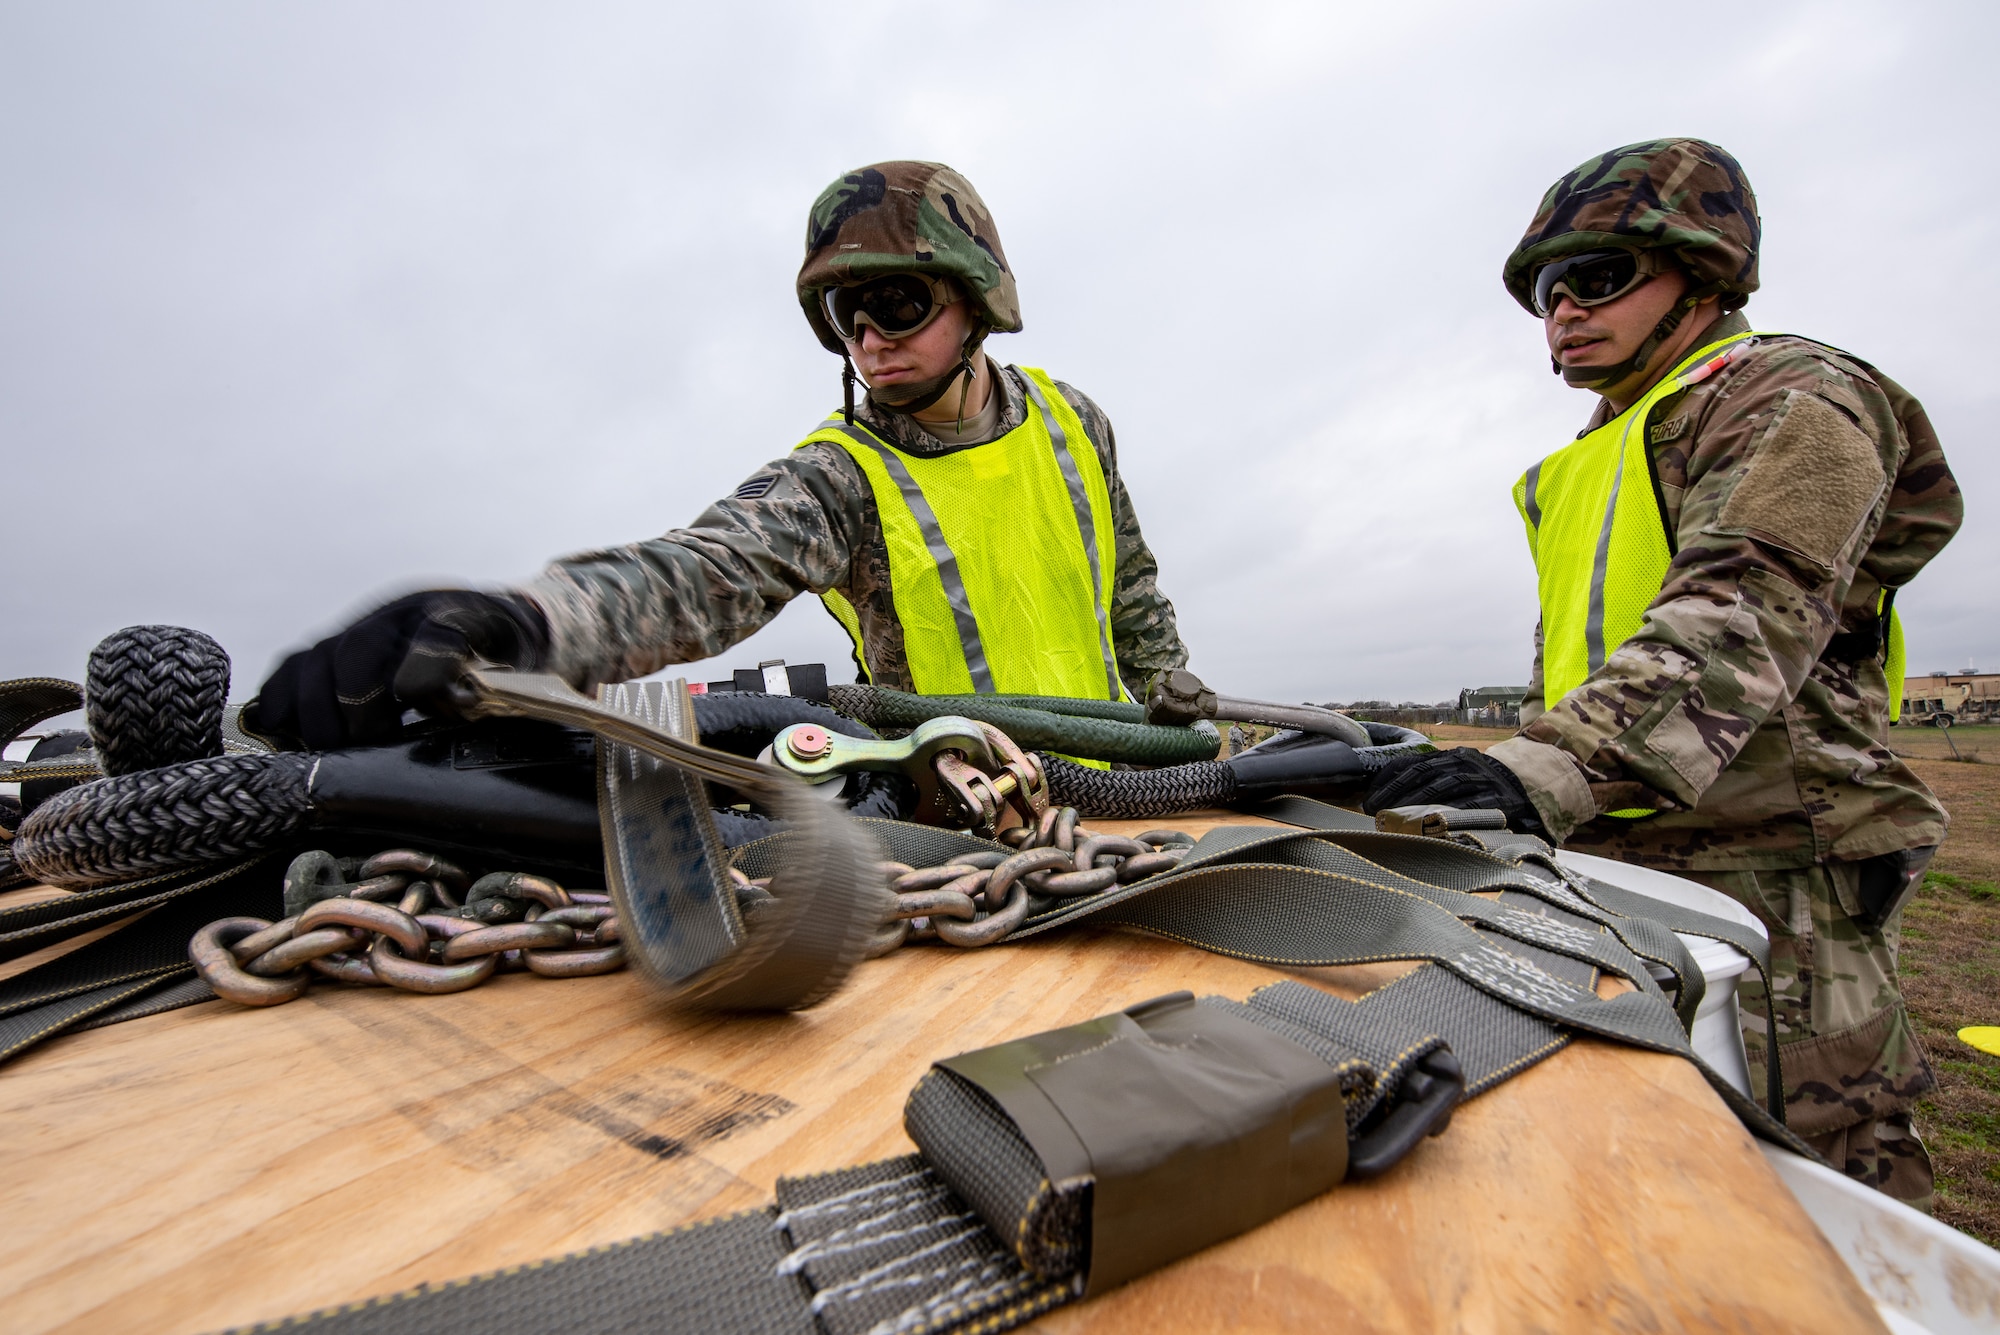 Senior Airman Timothy Watson, left, and Staff Sgt. Jose Frias, aerial transportation technicians, 26th Aerial Port Squadron, prepare to secure a 2,000-pound piece of cargo to a UH-60 Black Hawk helicopter flown by Soldiers from the Texas Army National Guard, Company C, 2-149 Aviation Regiment, during a sling load training event on Feb. 1, 2019, at Martindale Army Airfield, San Antonio, TX.